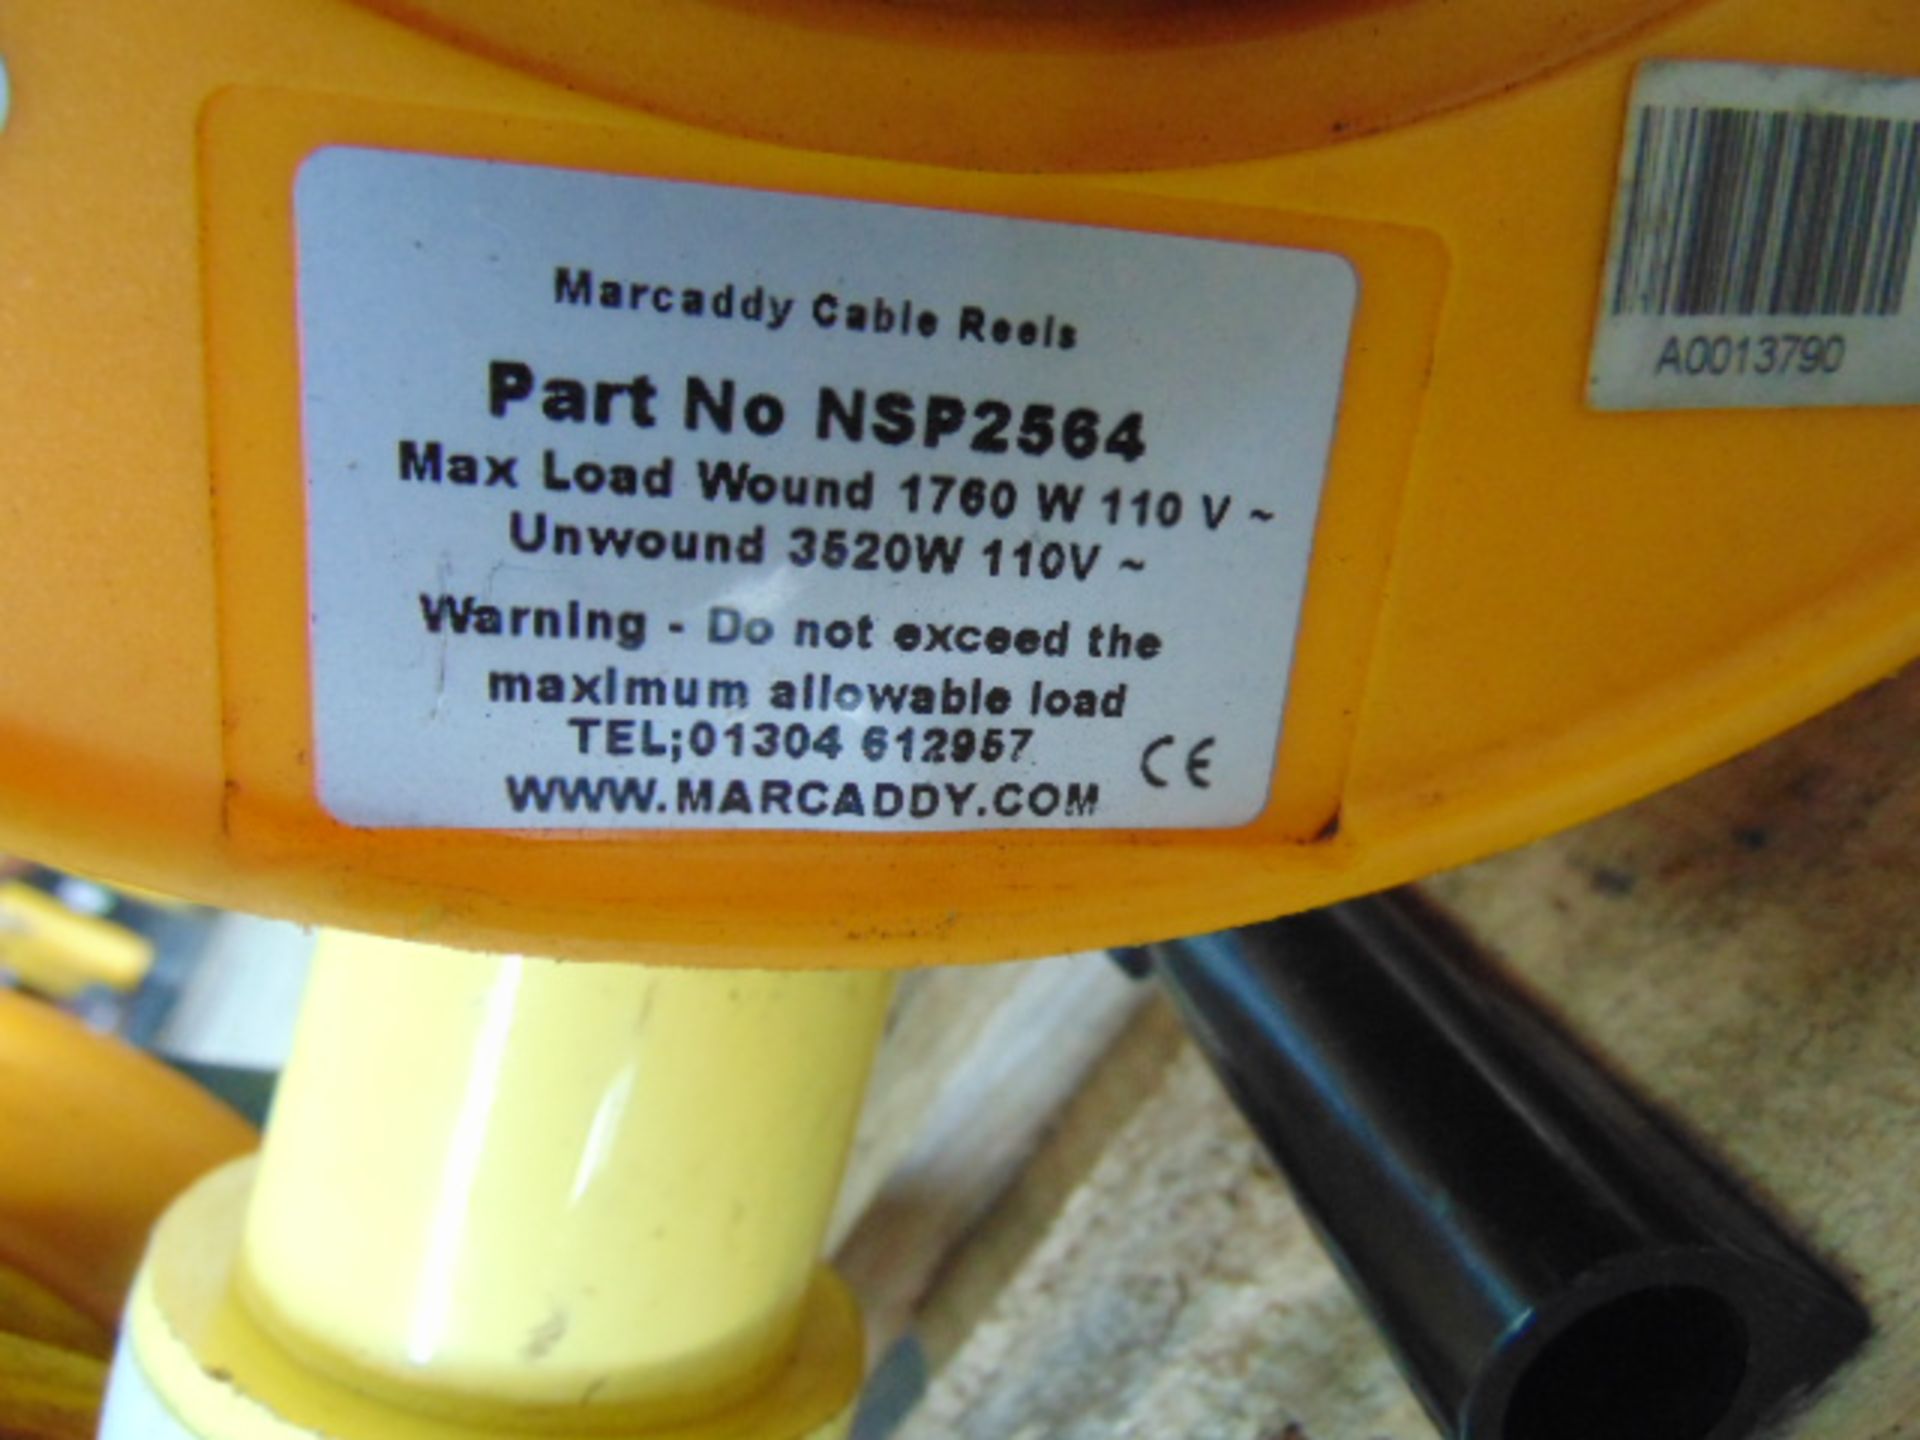 2 x Marcaddy NSP2564 110V Cable Extension Reels - Image 4 of 5